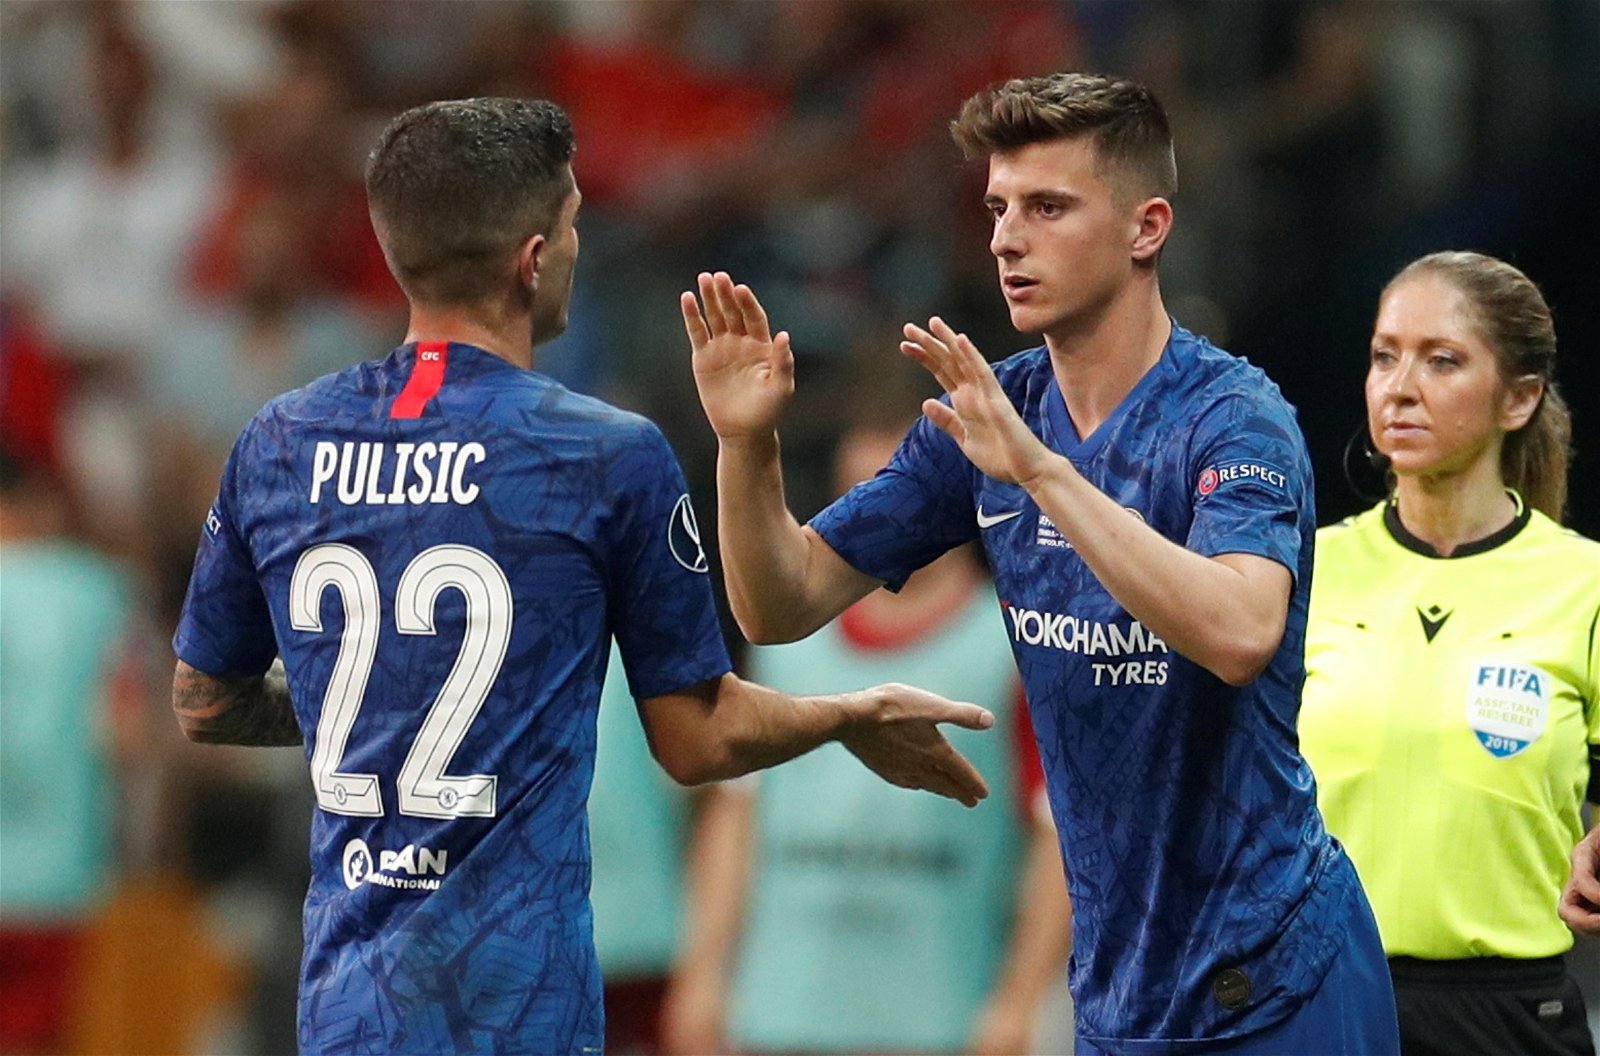 Chelsea youngster frustrated over lack of playing time